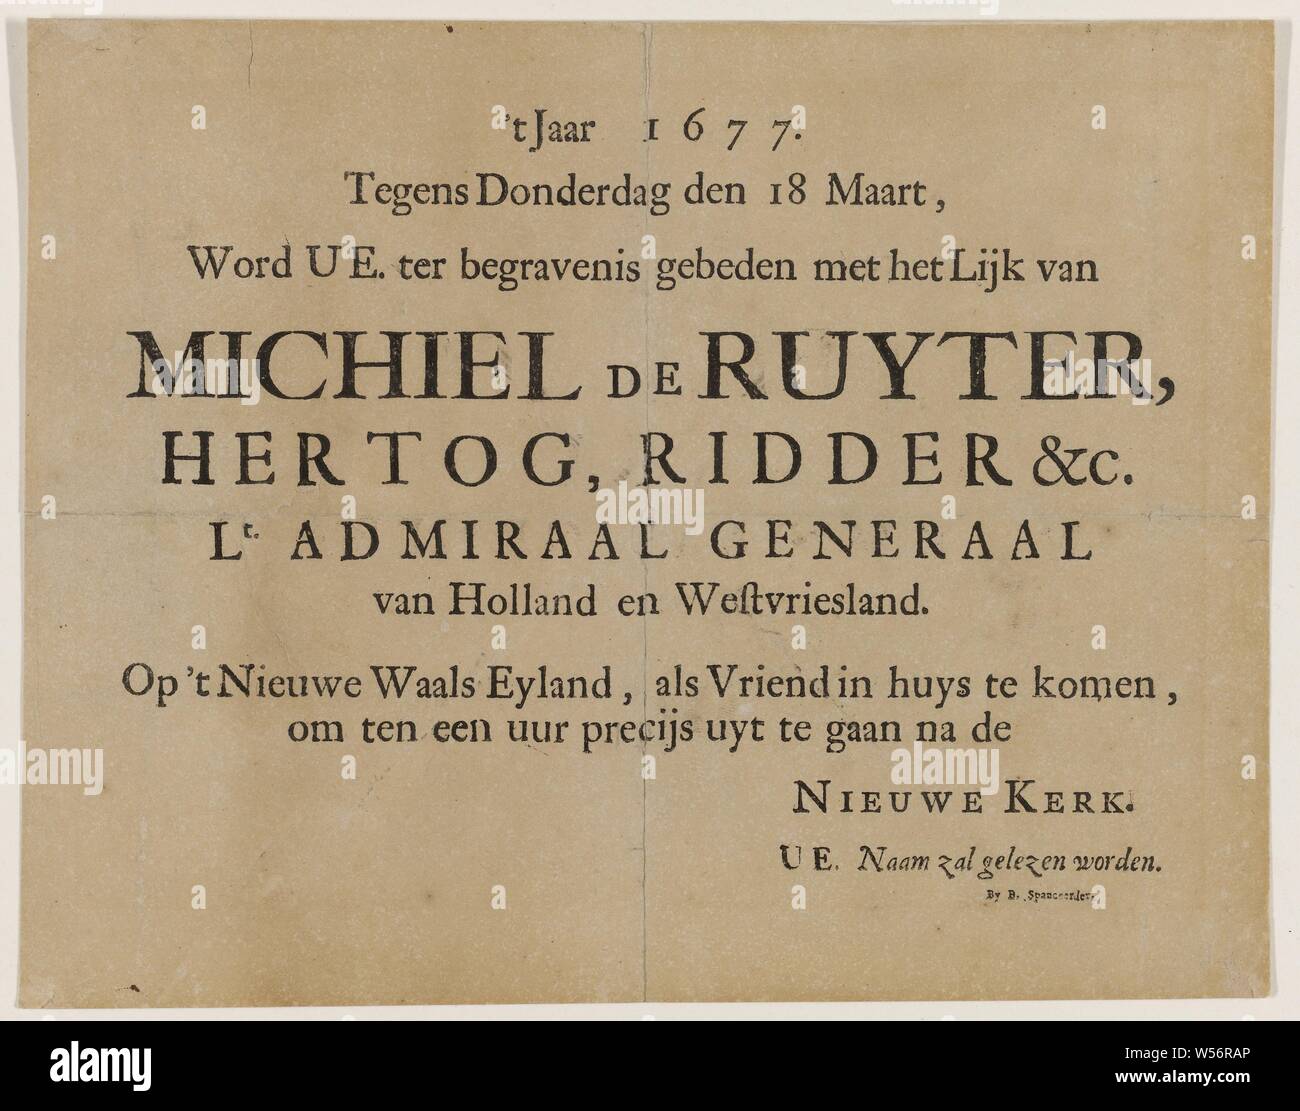 Invitation to the funeral of Michiel de Ruyter, Funeral letter ...